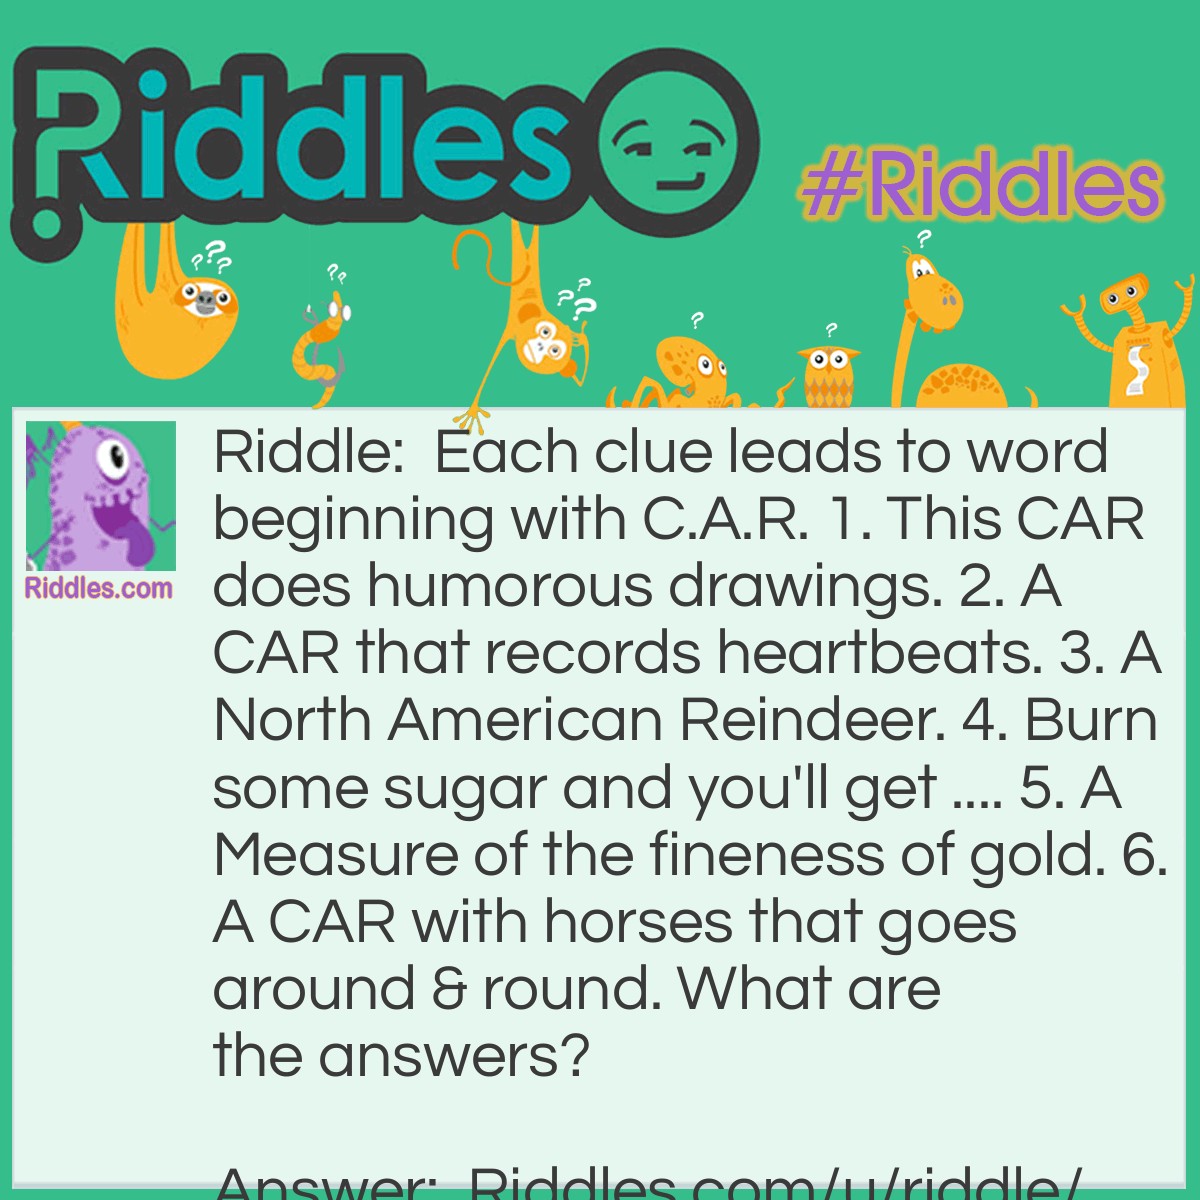 Riddle: Each clue leads to word beginning with C.A.R. 1. This CAR does humorous drawings. 2. A CAR that records heartbeats. 3. A North American Reindeer. 4. Burn some sugar and you'll get .... 5. A Measure of the fineness of gold. 6. A CAR with horses that goes around & round. What are the answers? Answer: 1. CARtoonist 2. CARdiograph 3. CARibou 4. CARamel 5. CARat 6. CARousel